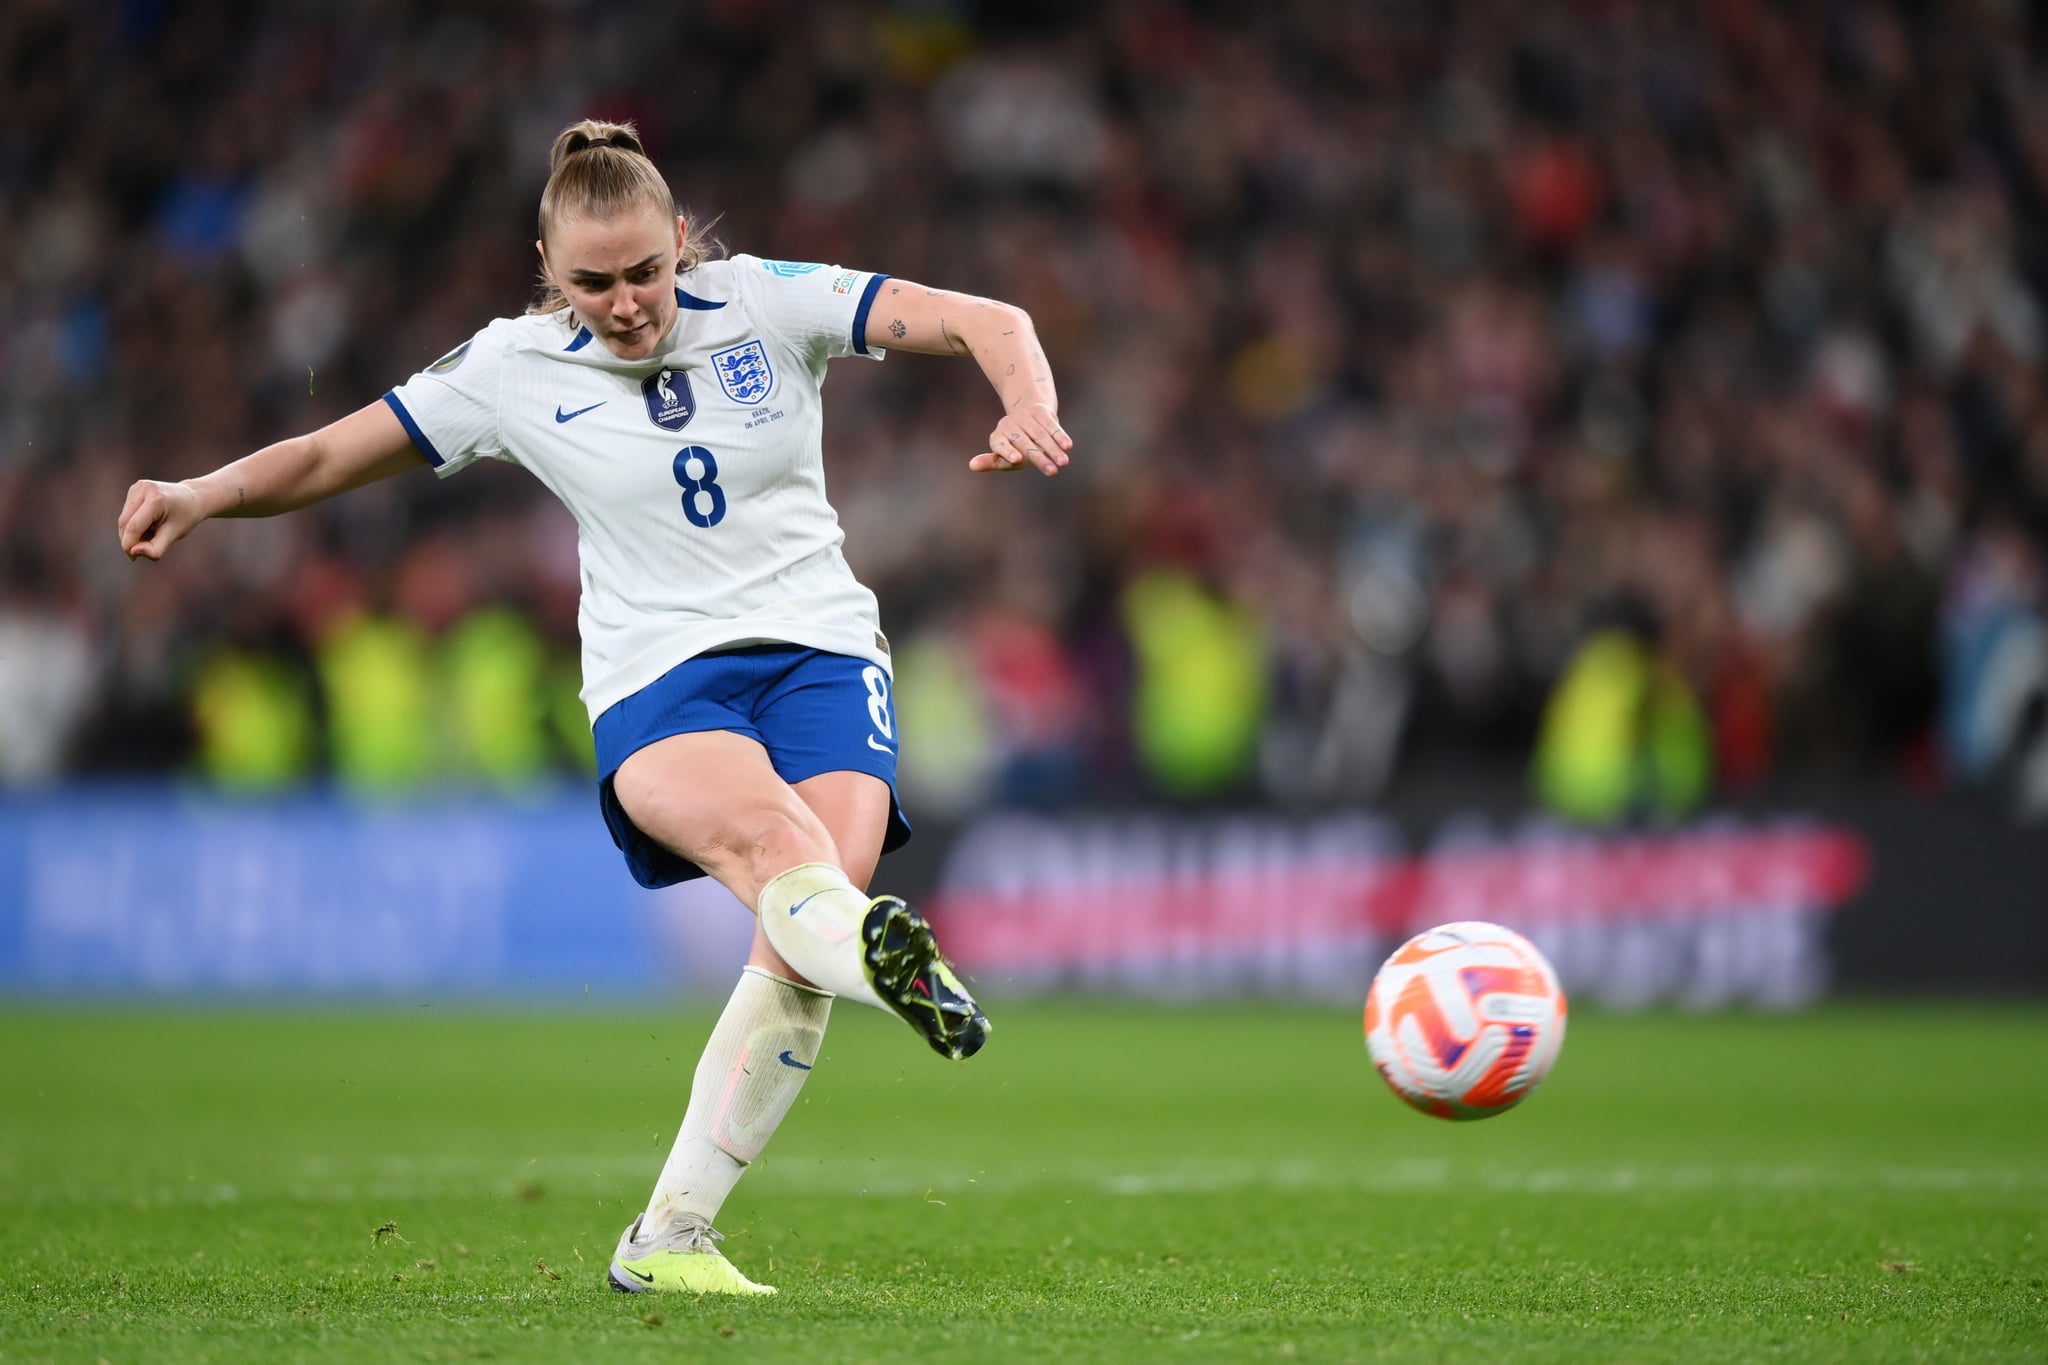 LONDON, ENGLAND - APRIL 06: Georgia Stanway of England scores the team's first penalty in the penalty shoot out during the Women´s Finalissima 2023 match between England and Brazil at Wembley Stadium on April 06, 2023 in London, England. (Photo by Justin Setterfield/Getty Images)